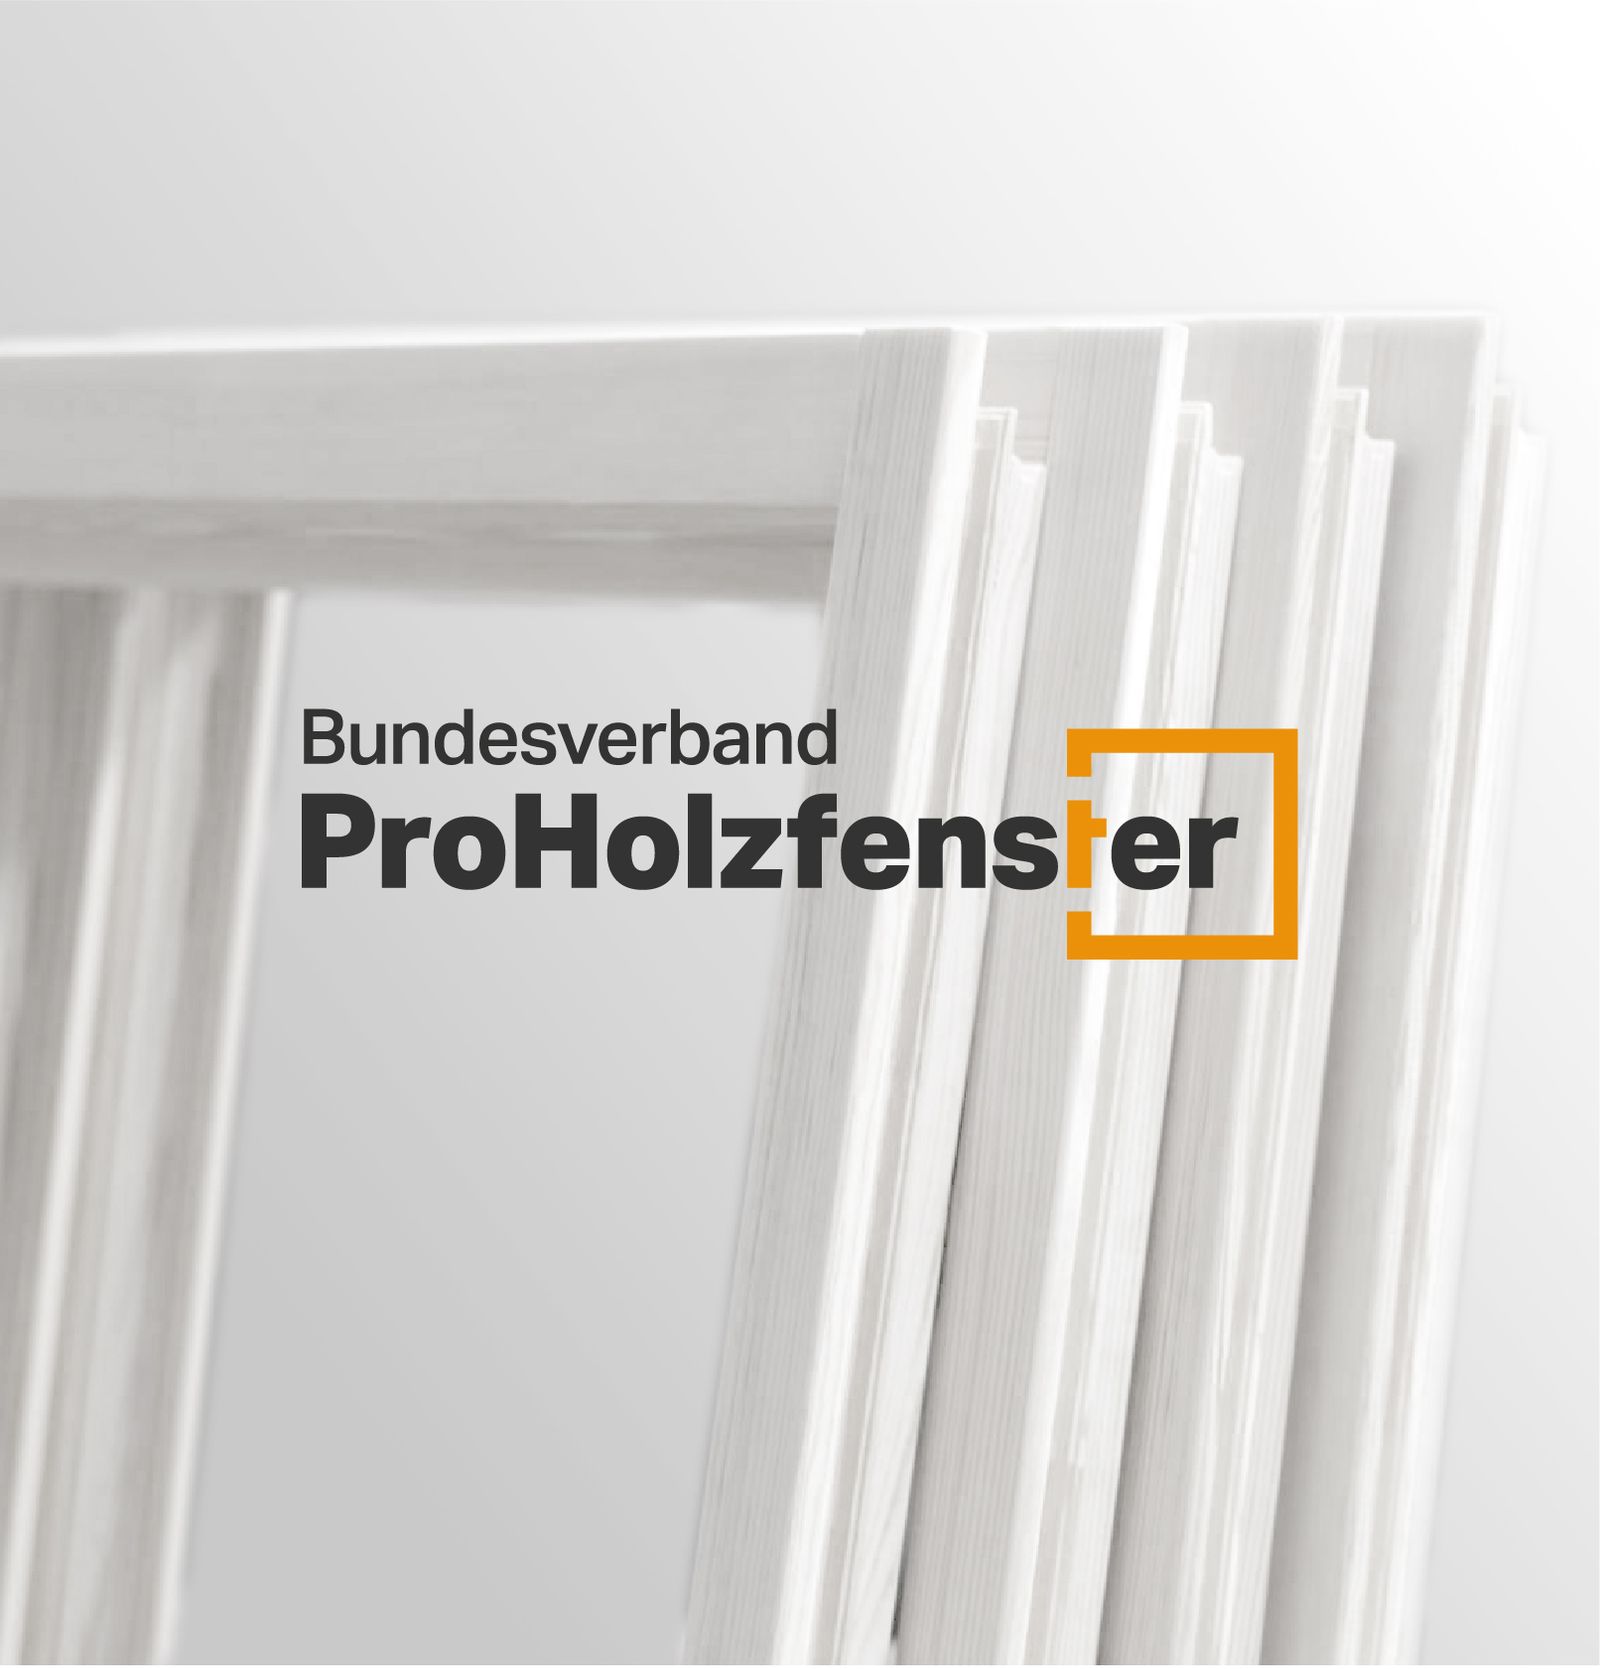 ProHolzfenster-branding-by-markosesther